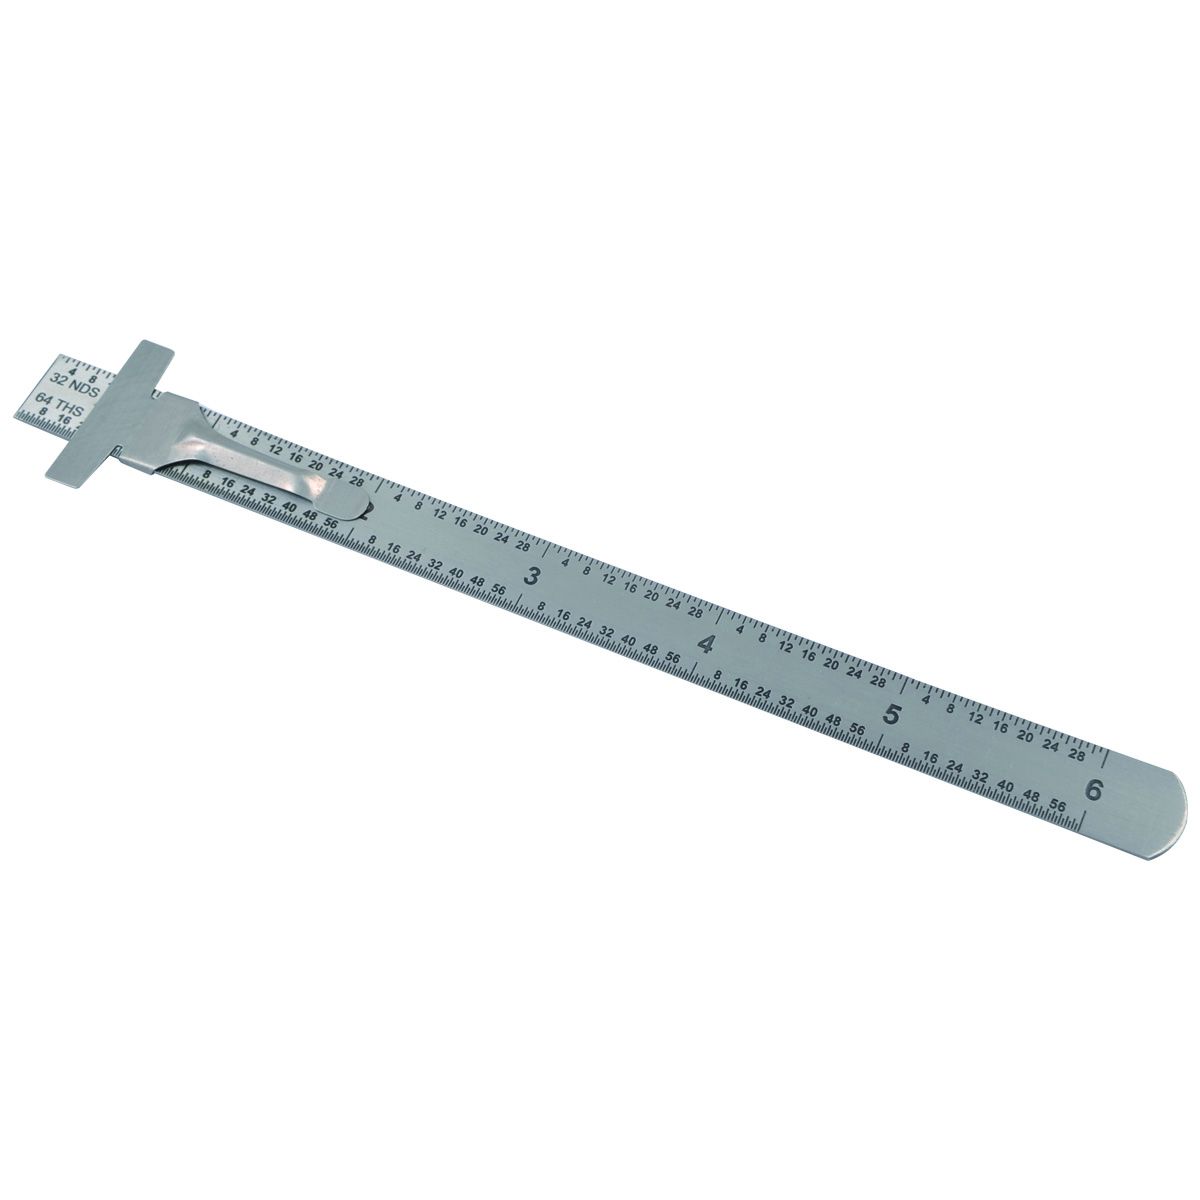 6 X 15/32" STAINLESS STEEL RULER (32NDS-64THS-MM & 0.5MM) (7006-0003)